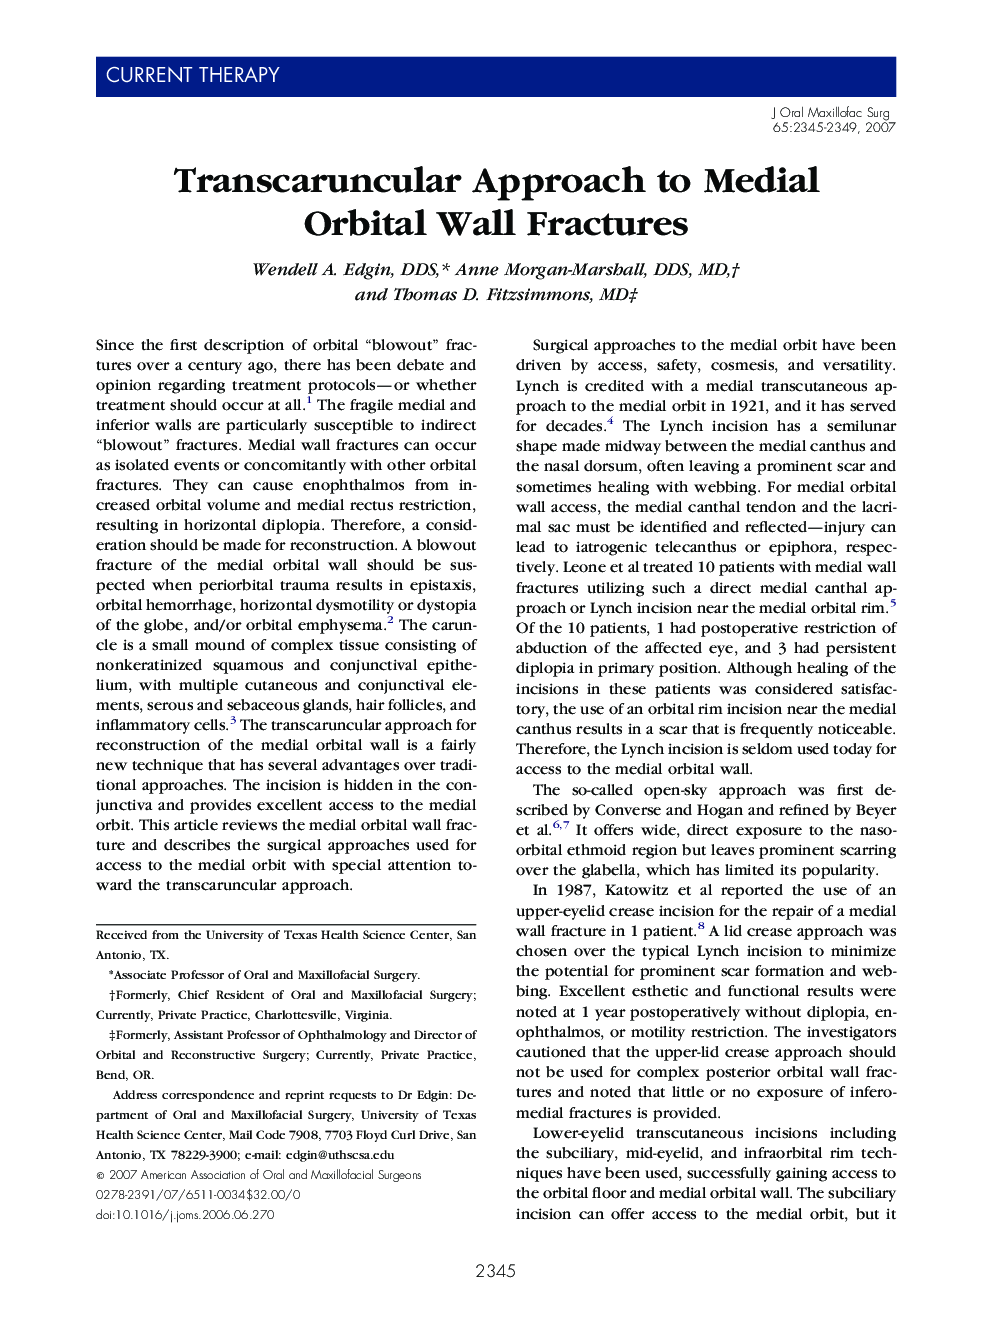 Transcaruncular Approach to Medial Orbital Wall Fractures